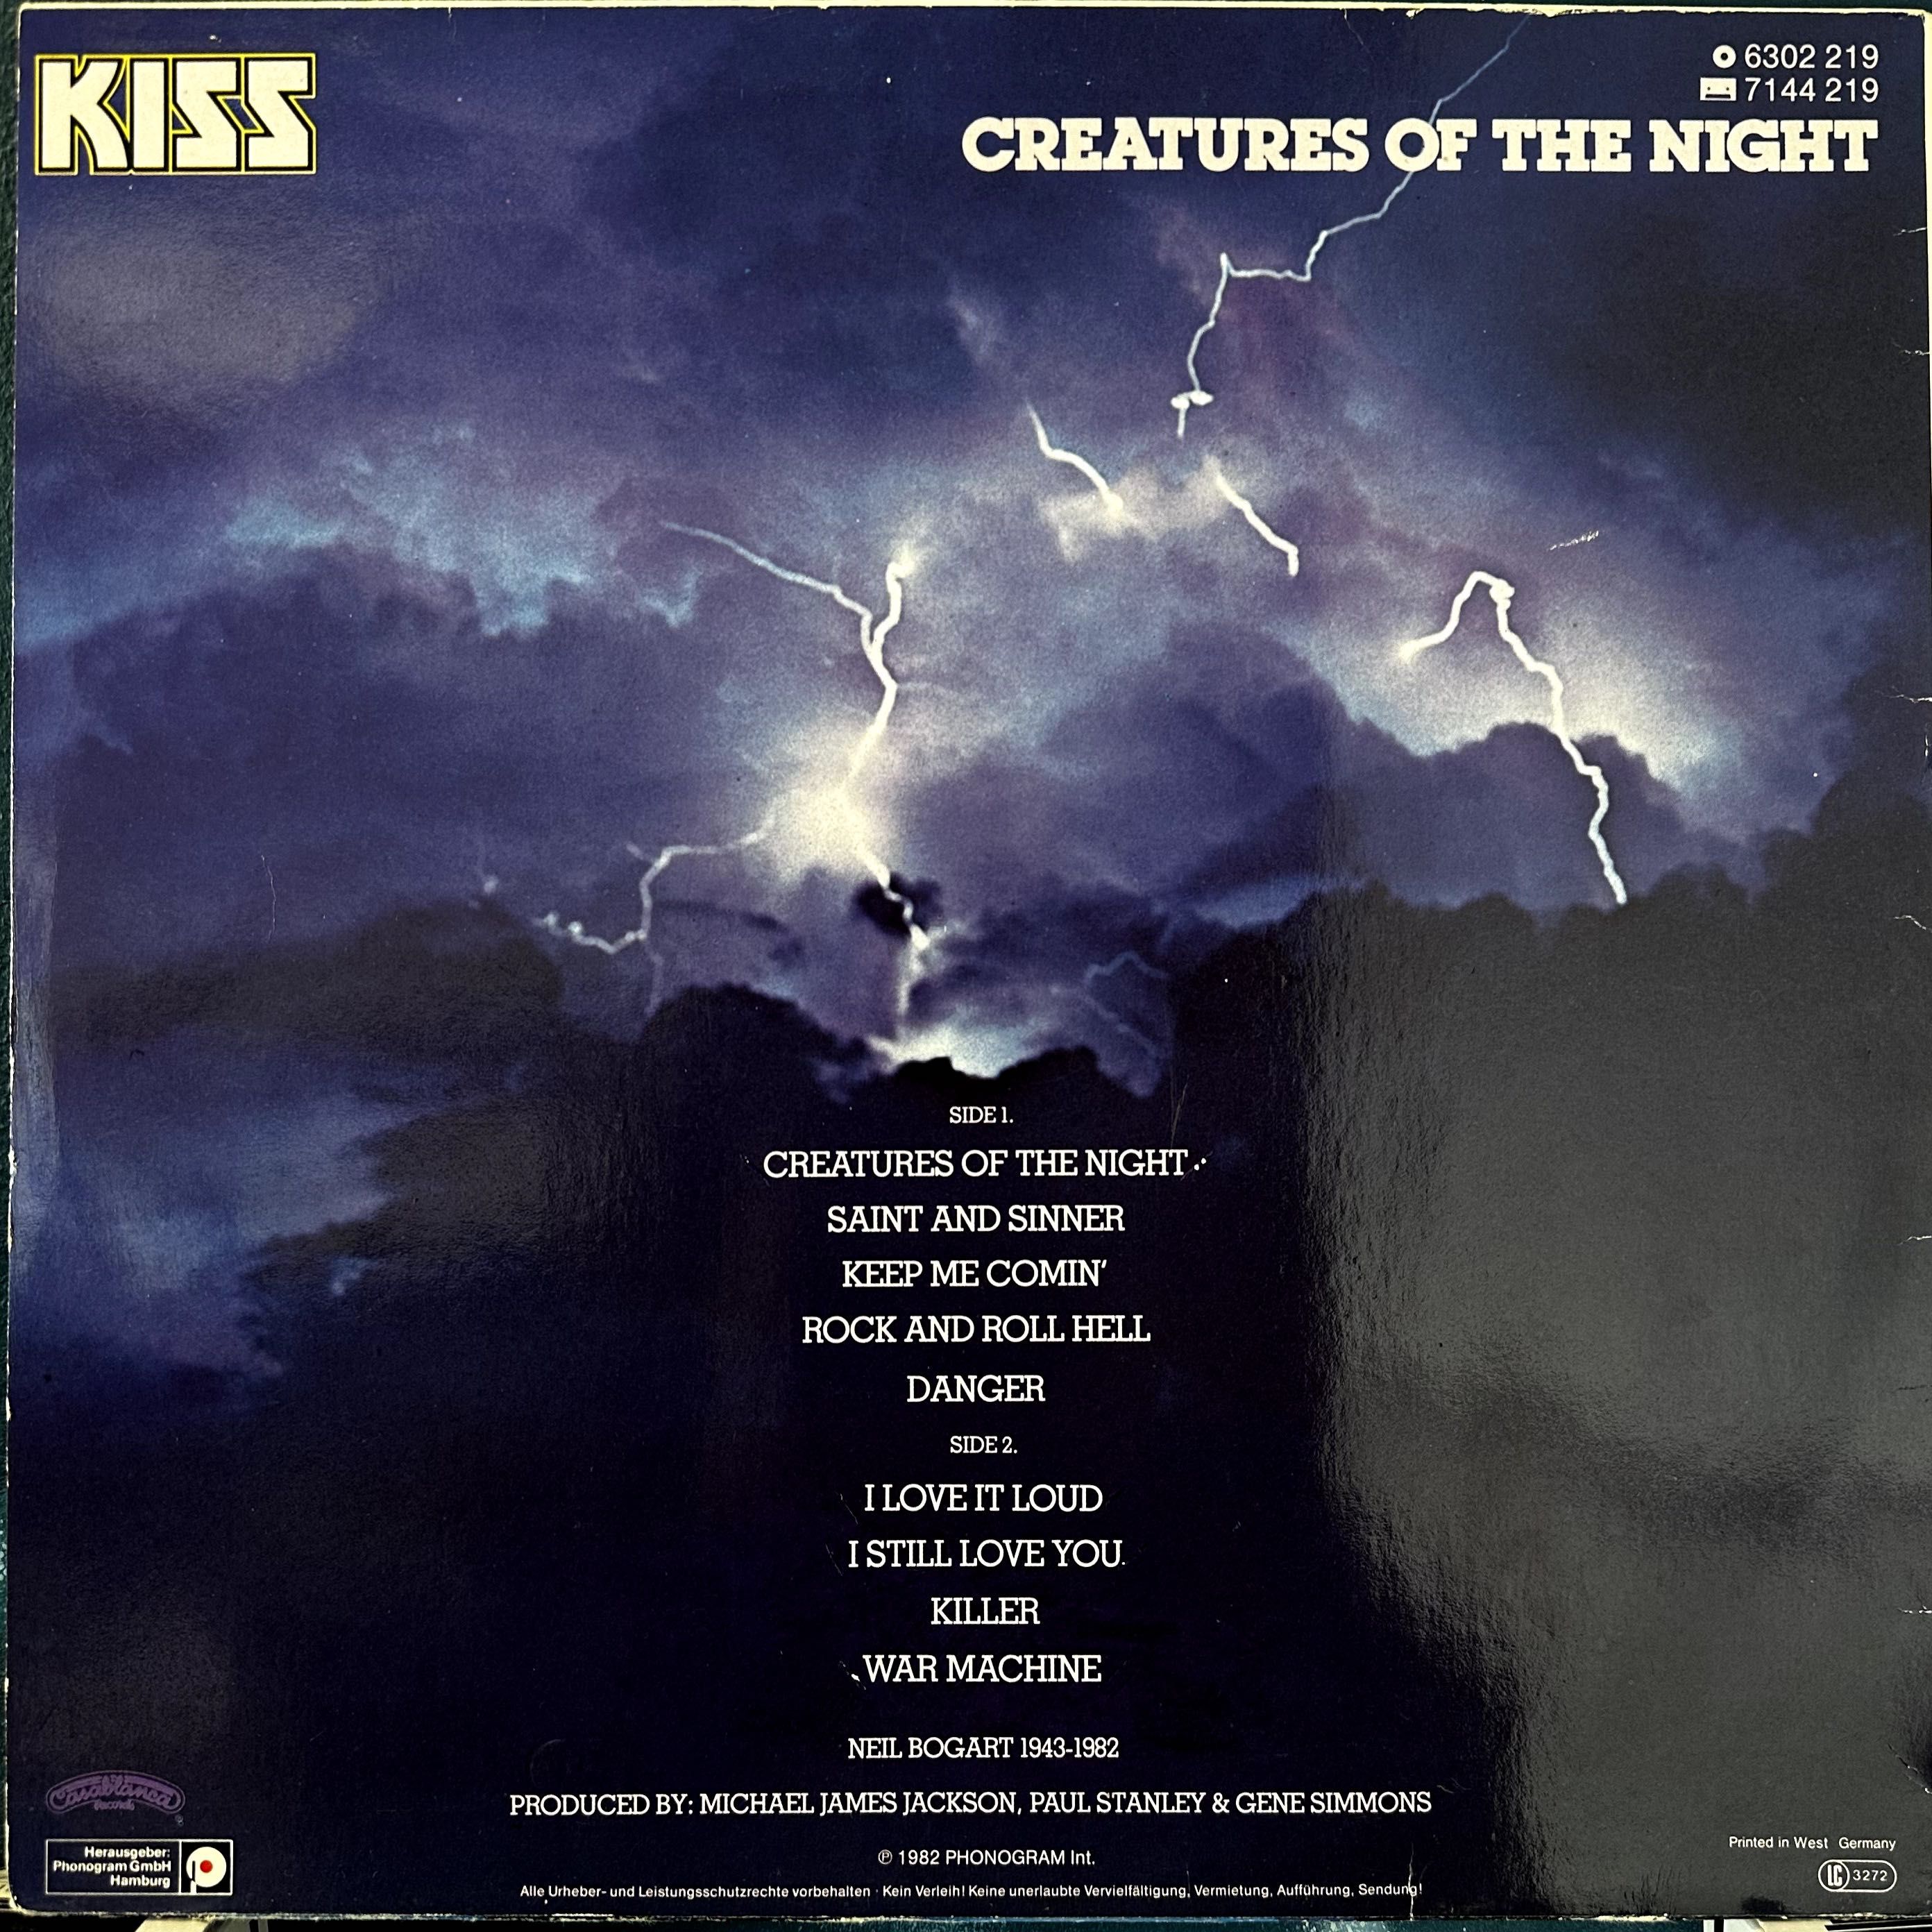 Kiss - Creatures of the Night (Vinyl, 1982, Germany)